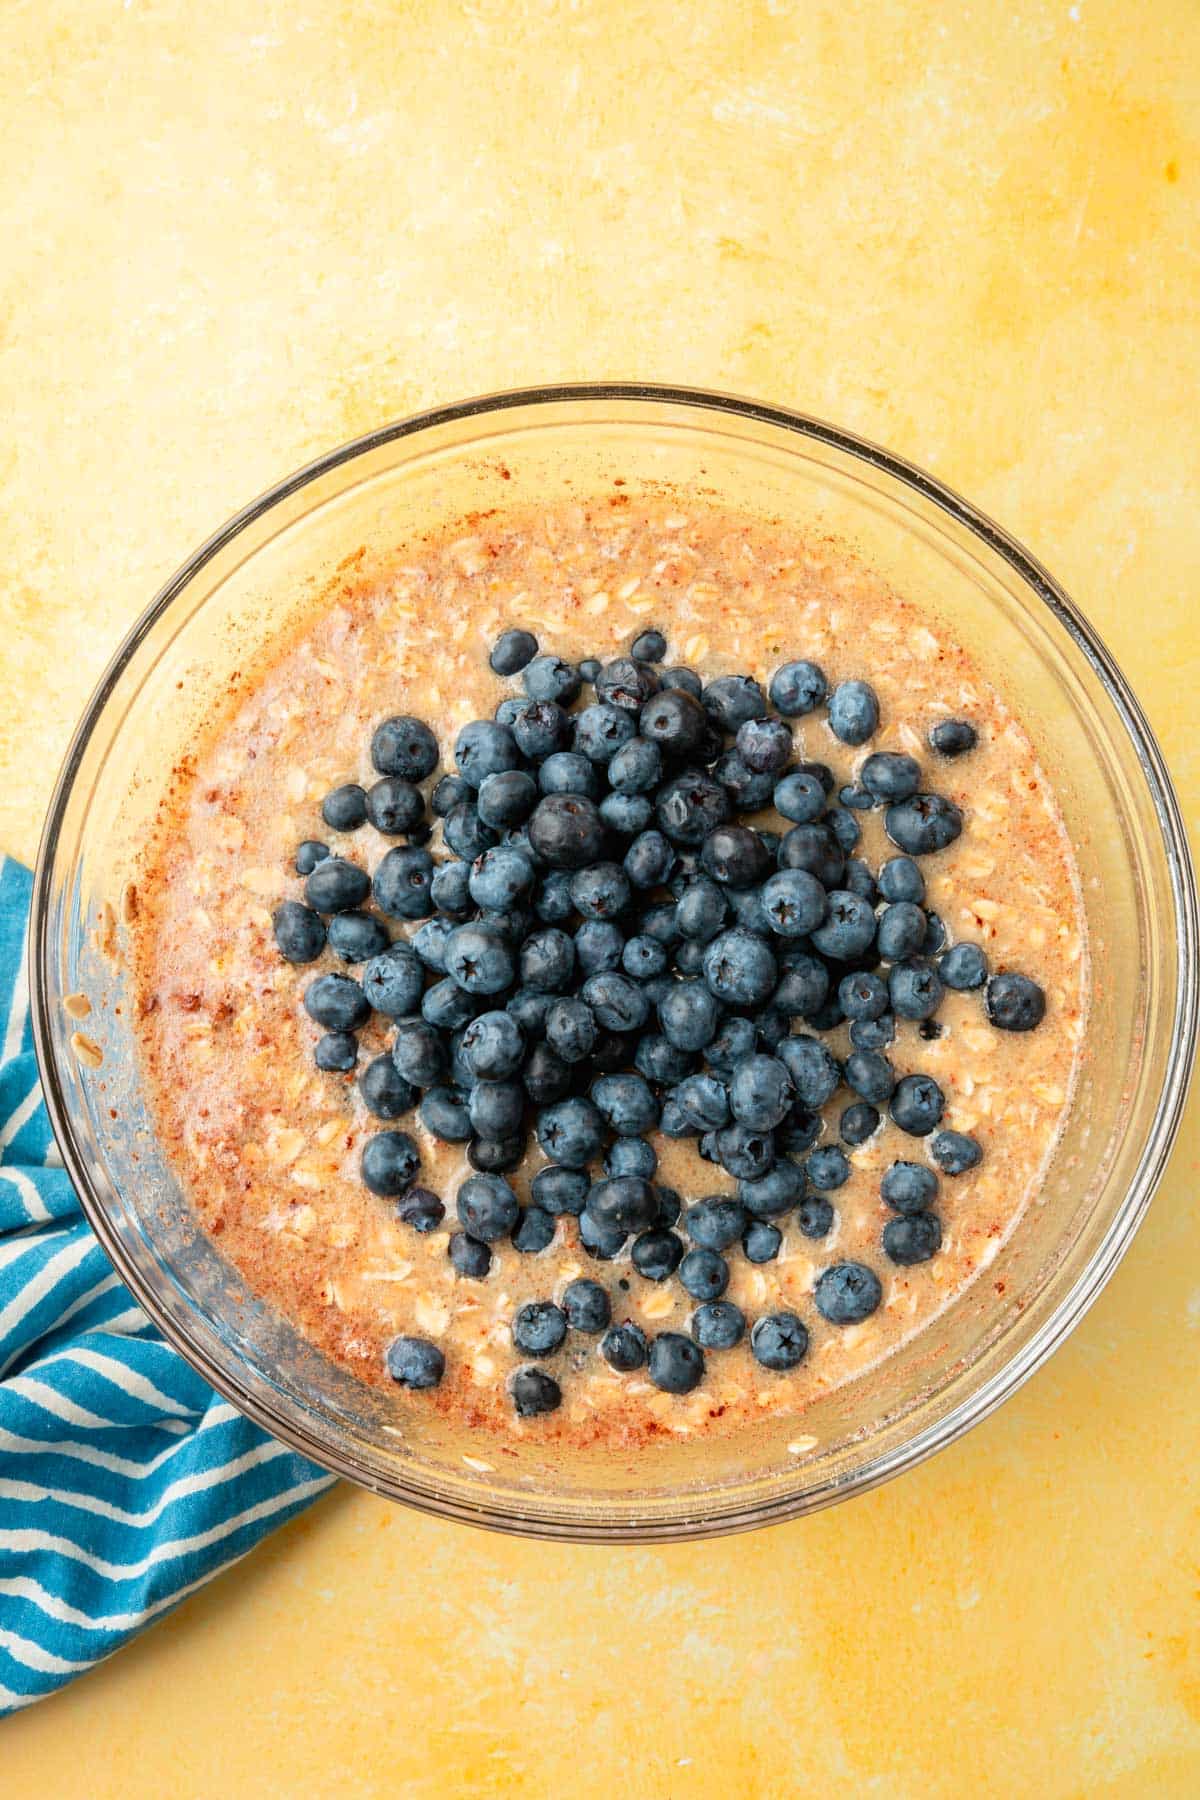 A glass mixing bowl of a wet mixture of oats, almond milk, cinnamon, and applesauce topped with fresh blueberries that have not yet been mixed in.